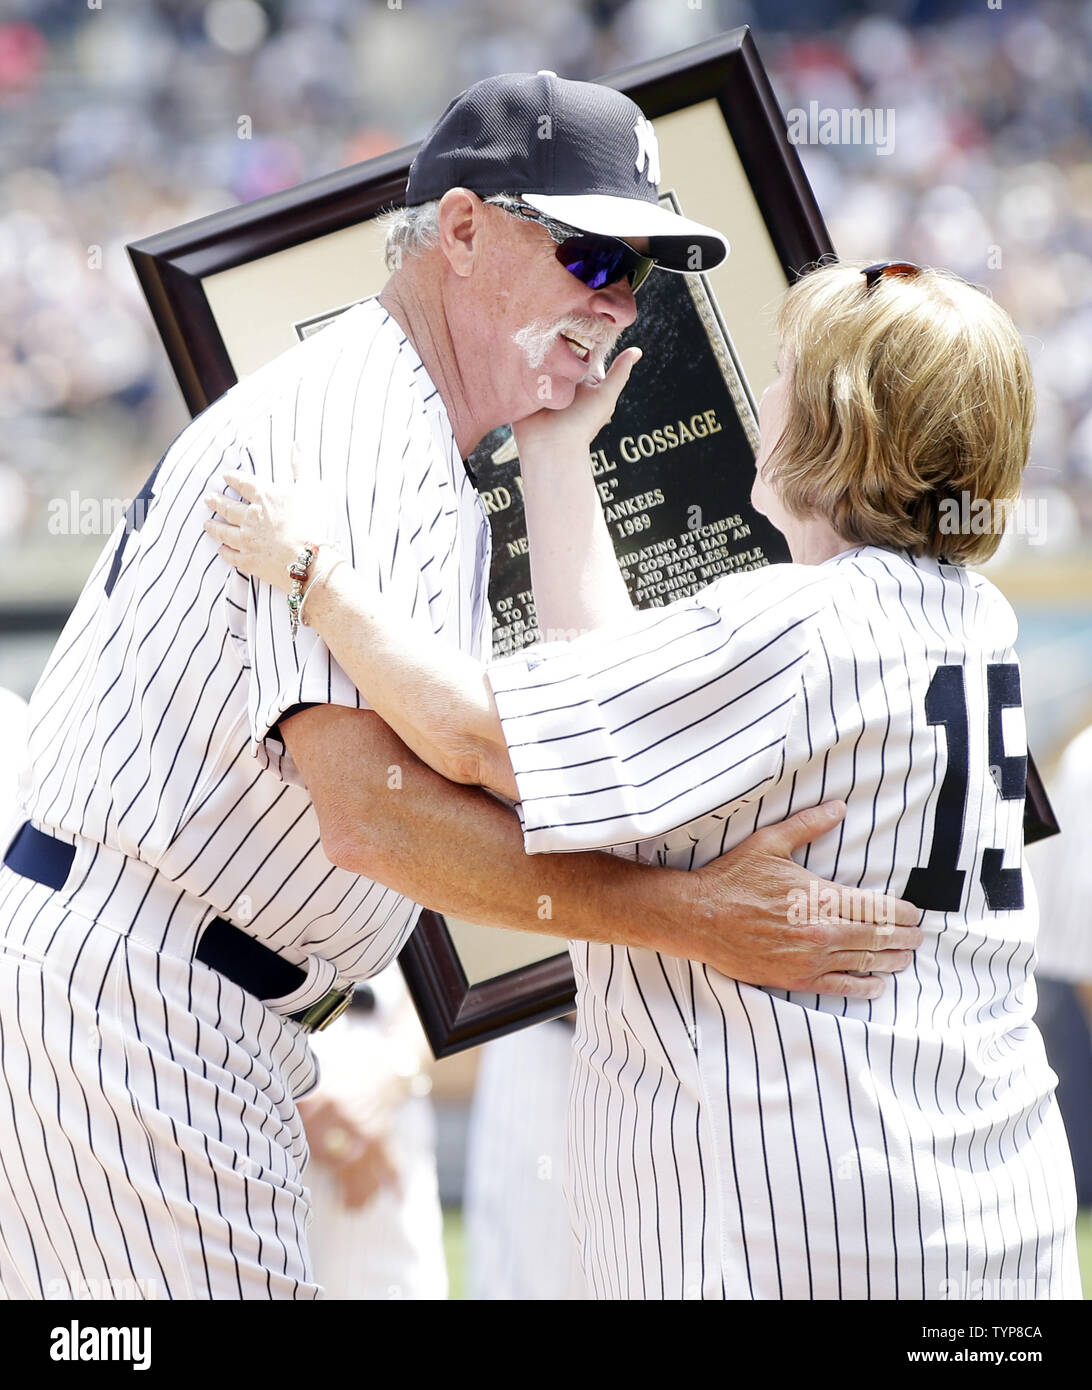 Retired New York Yankee pitcher Goose Gossage hugs Diana Munson after he is honored with a monument to be placed in Monument Park at the 68th Annual Old-Timers' Day before the New York Yankees play the Baltimore Orioles at Yankee Stadium in New York City on on June 22, 2014.   UPI/John Angelillo Stock Photo